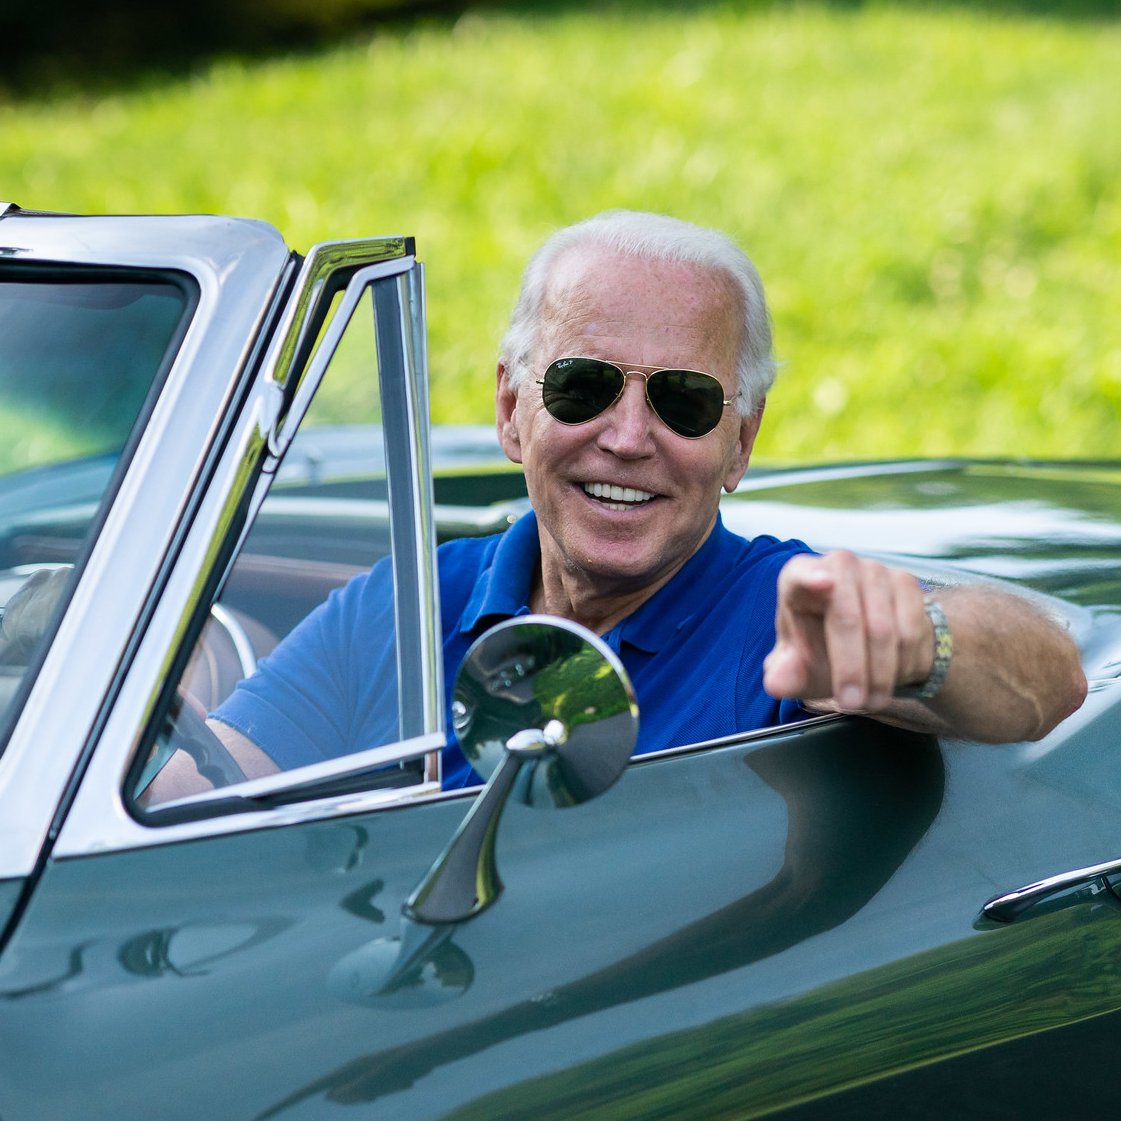 You know what's great about President Biden?

He's created 14 million jobs, signed the biggest ever infrastructure bill, brought back manufacturing and lowered insulin costs.

He hasn't asked for donations for lawyers fees, and hasn't said fake news once. 😎